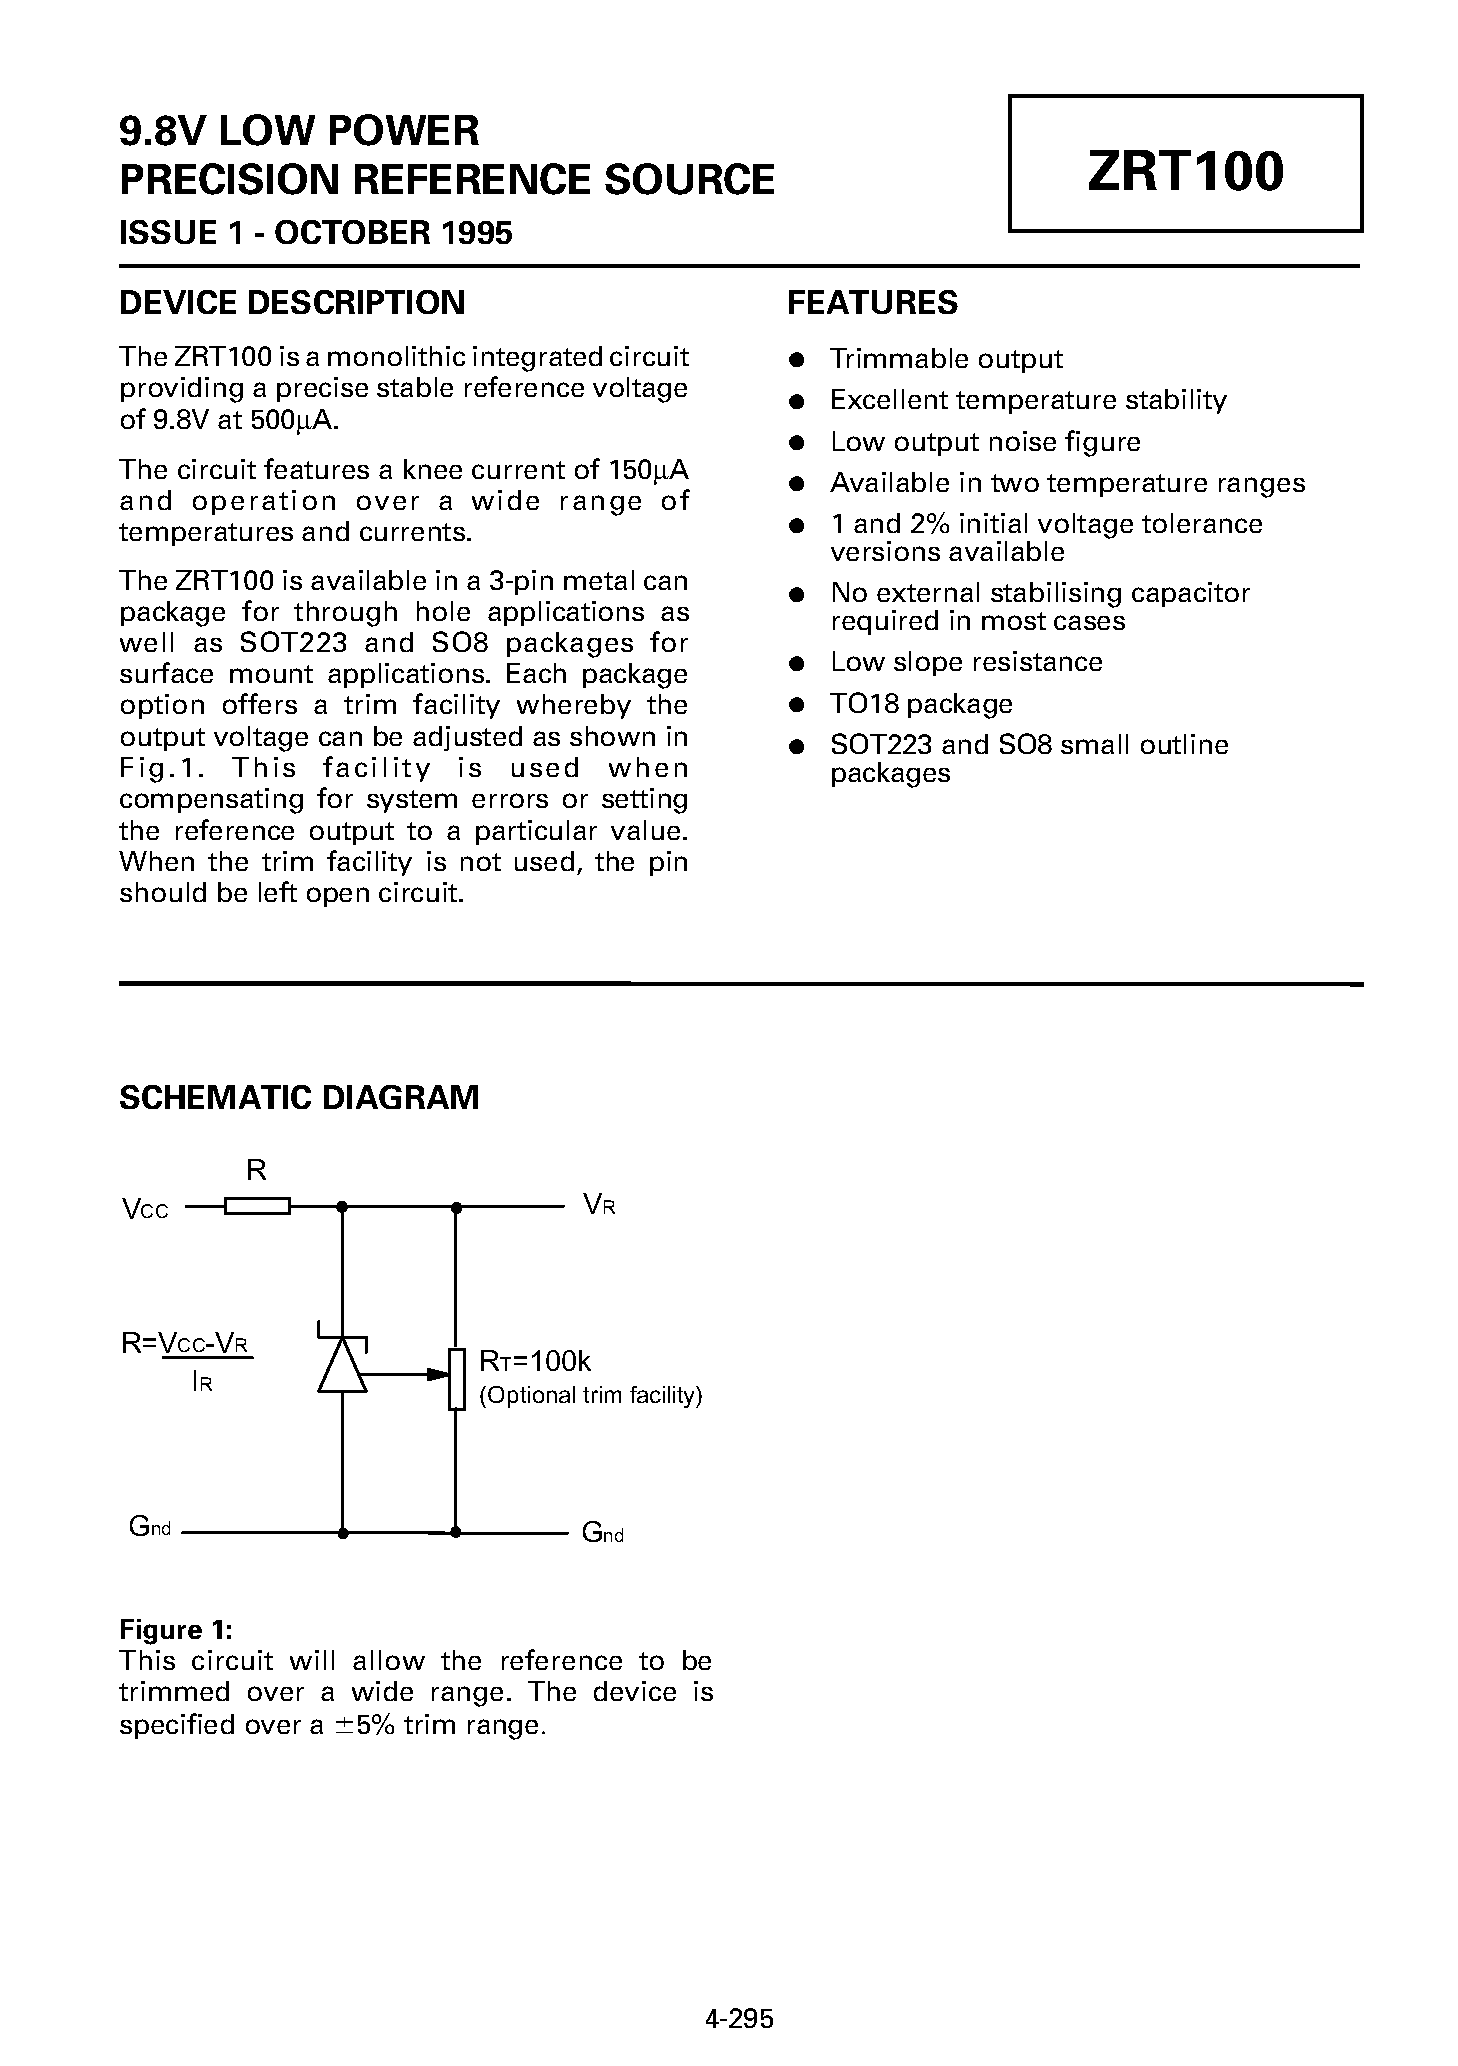 Datasheet ZRT100GC2 - 9.8V LOW POWER PRECISION REFERENCE SOURCE page 1